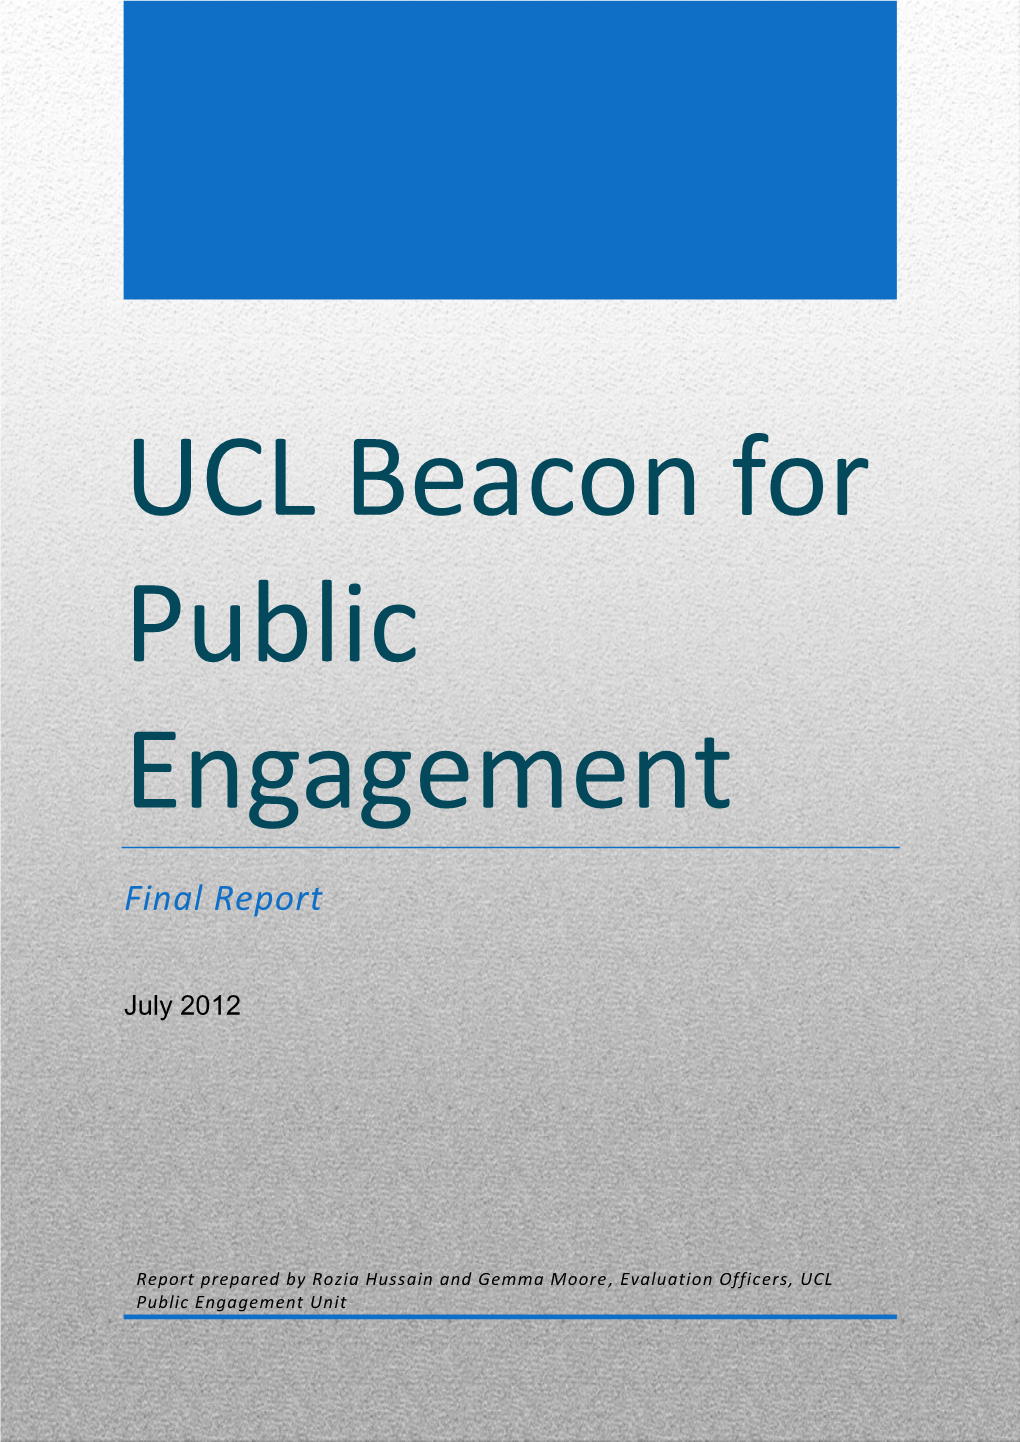 UCL Beacon for Public Engagement